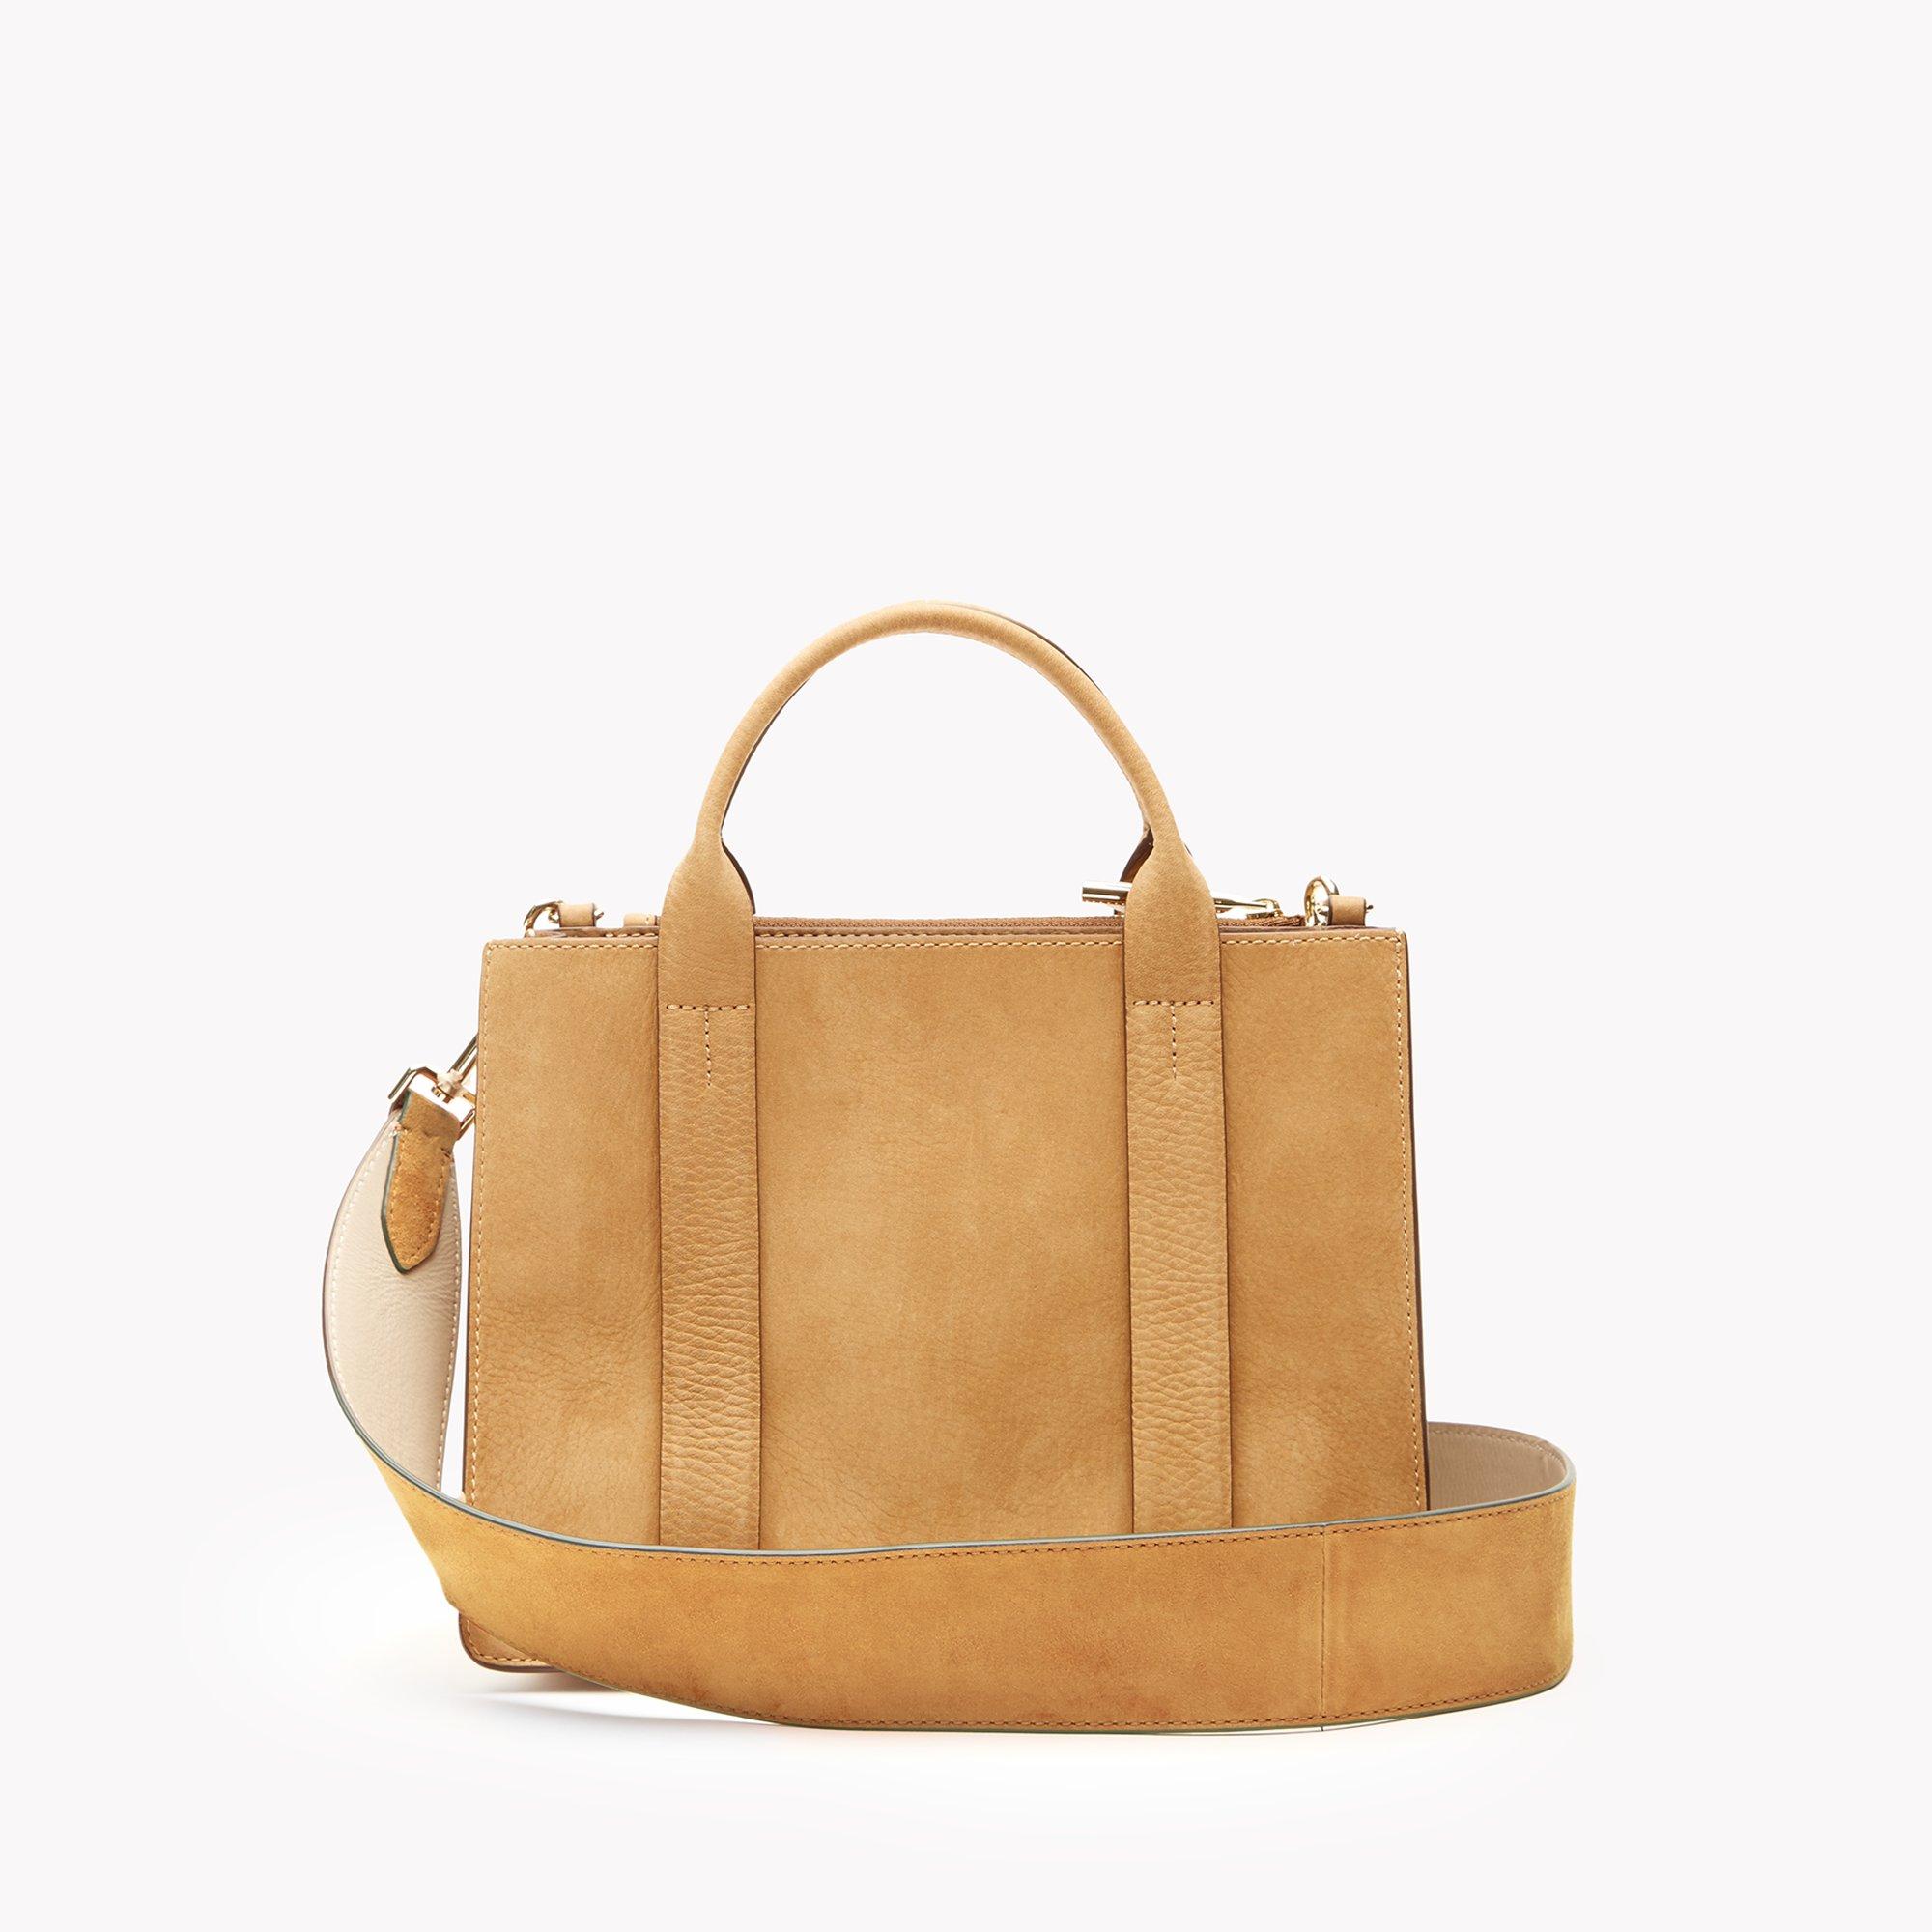 Theory West Mini Bag in Nubuck Leather